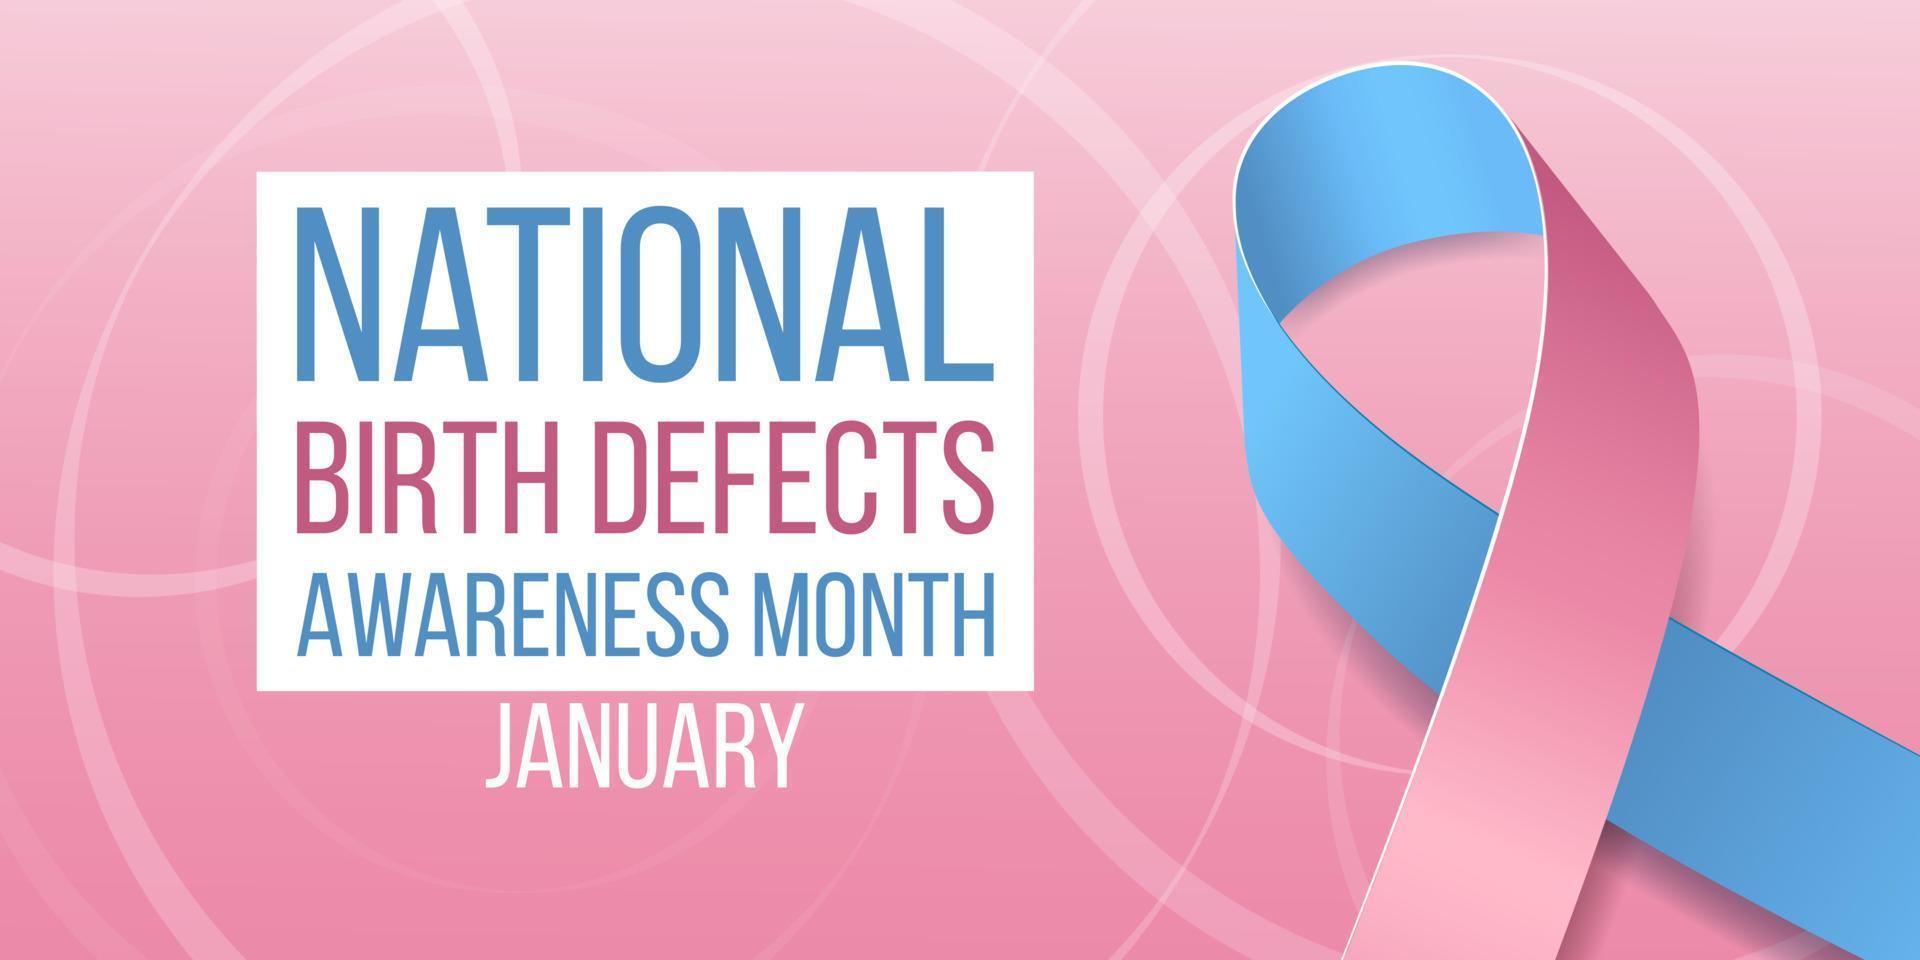 National Birth Defects Awareness Month concept. Banner with pink and blue ribbon awareness and text. Vector illustration.